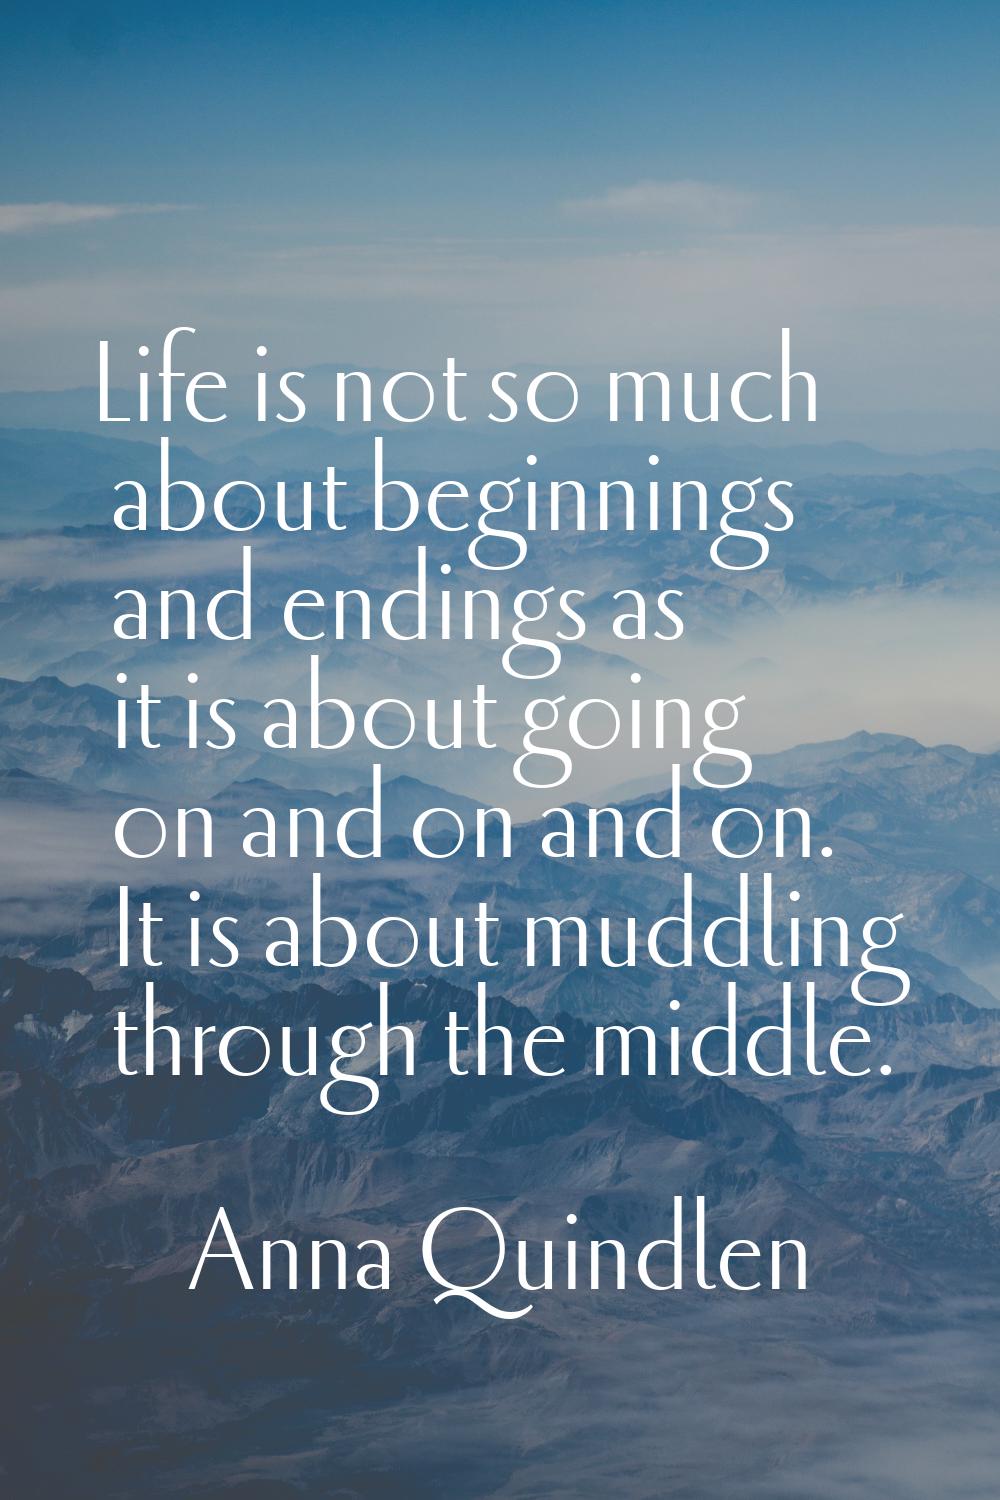 Life is not so much about beginnings and endings as it is about going on and on and on. It is about